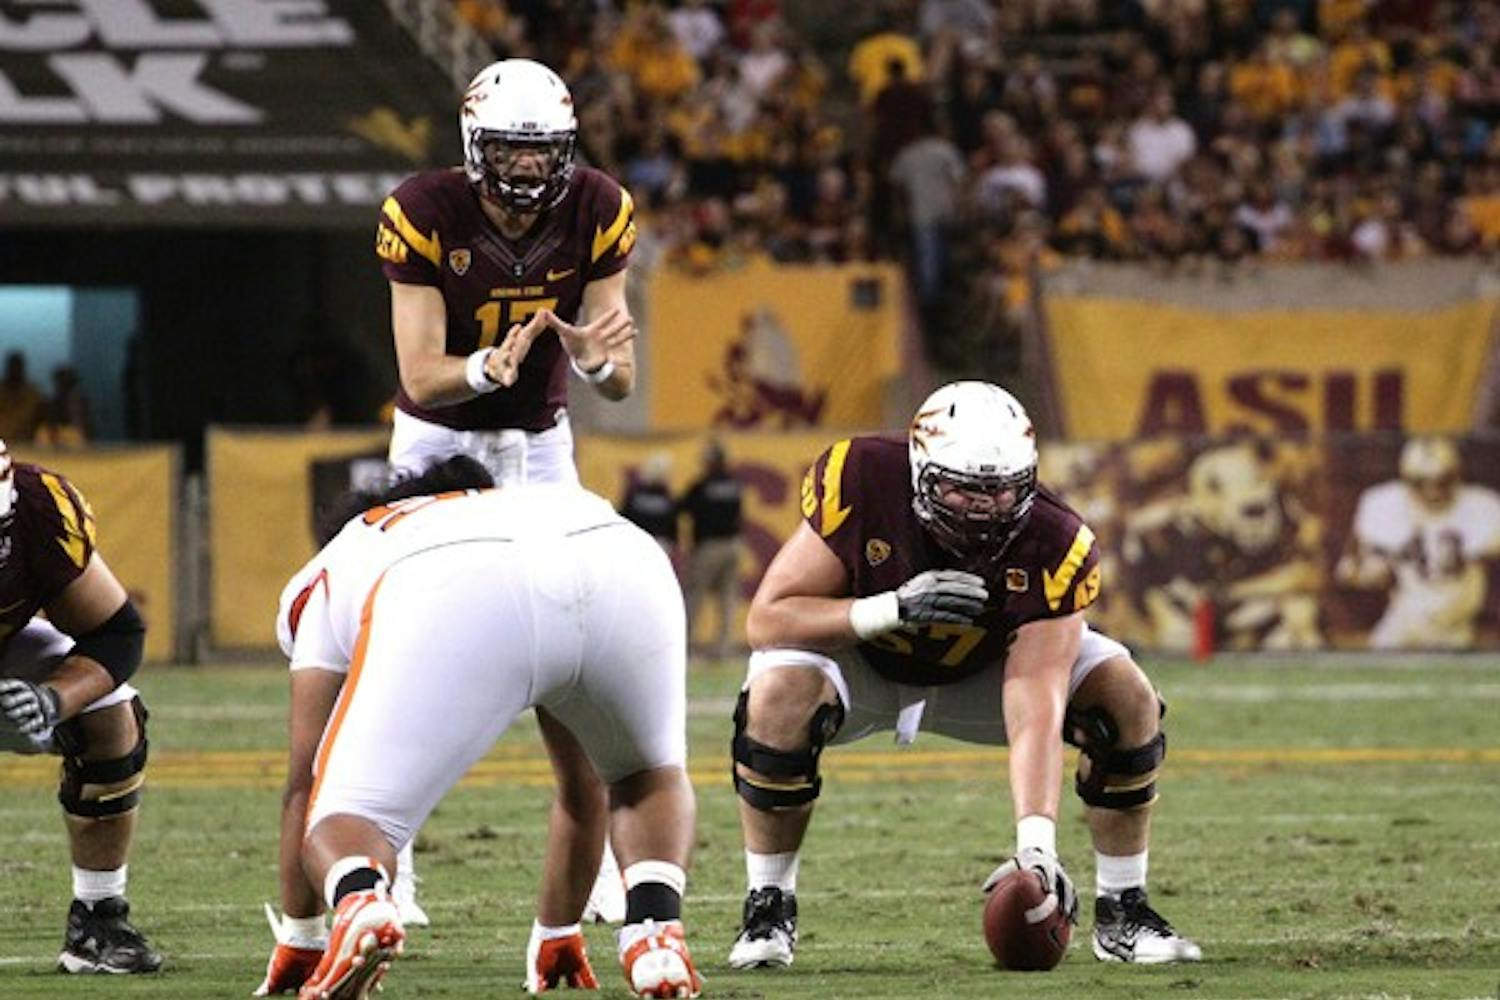 THE REPLACEMENT: Sophomore offensive lineman Kody Koebensky (67) waits to snap the ball to junior quarterback Brock Osweiler during the Sun Devils’ 35-20 win over Oregon State on Saturday. Koebensky will get the nod at center if Gerhart is unable to return. (Photo by Beth Easterbrook)